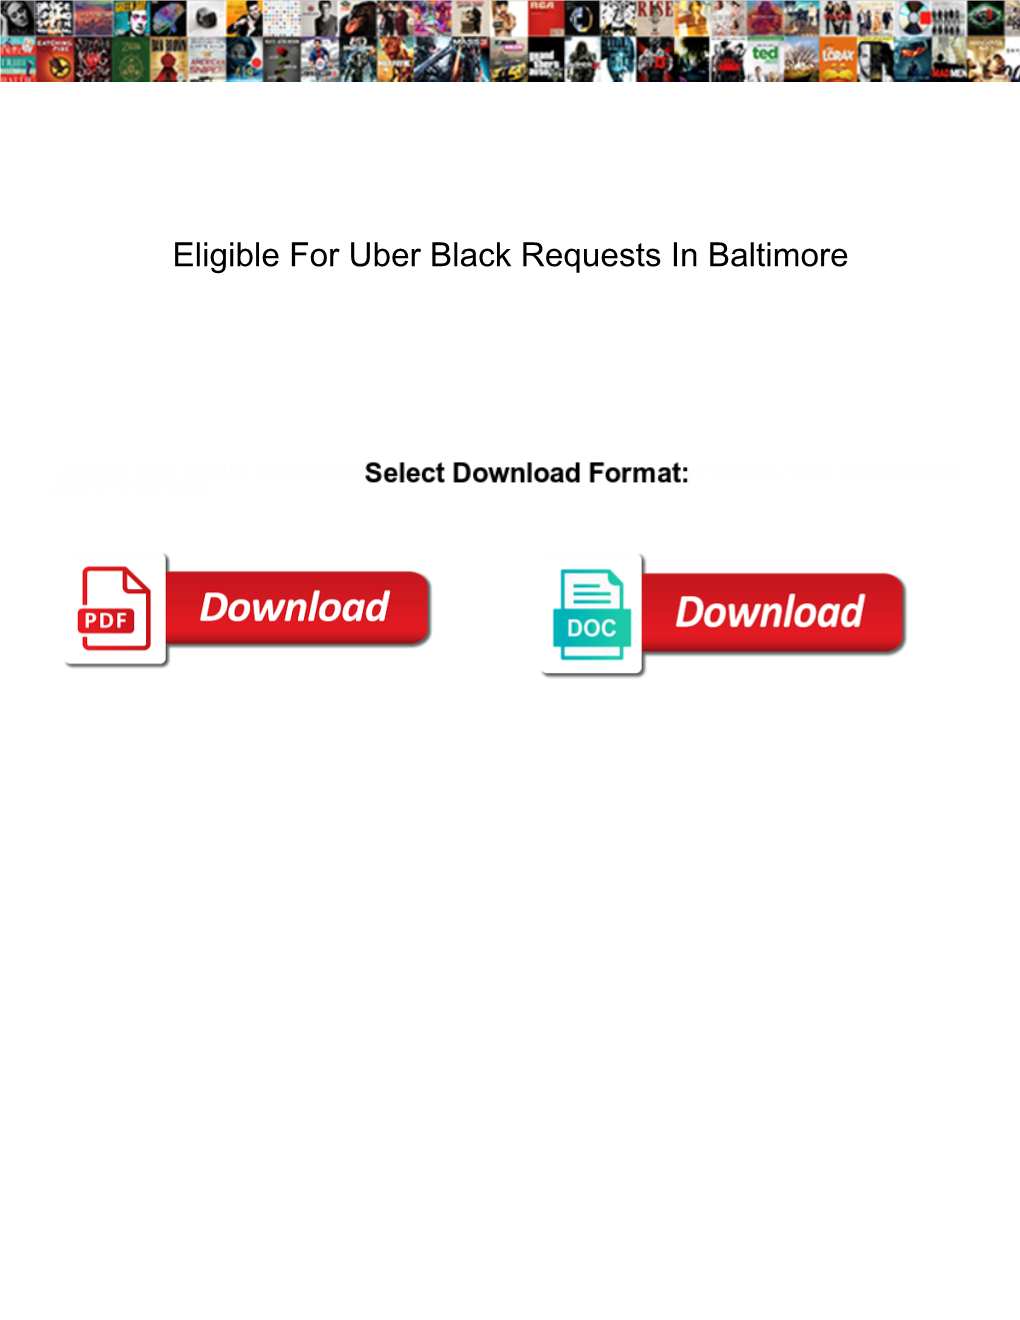 Eligible for Uber Black Requests in Baltimore